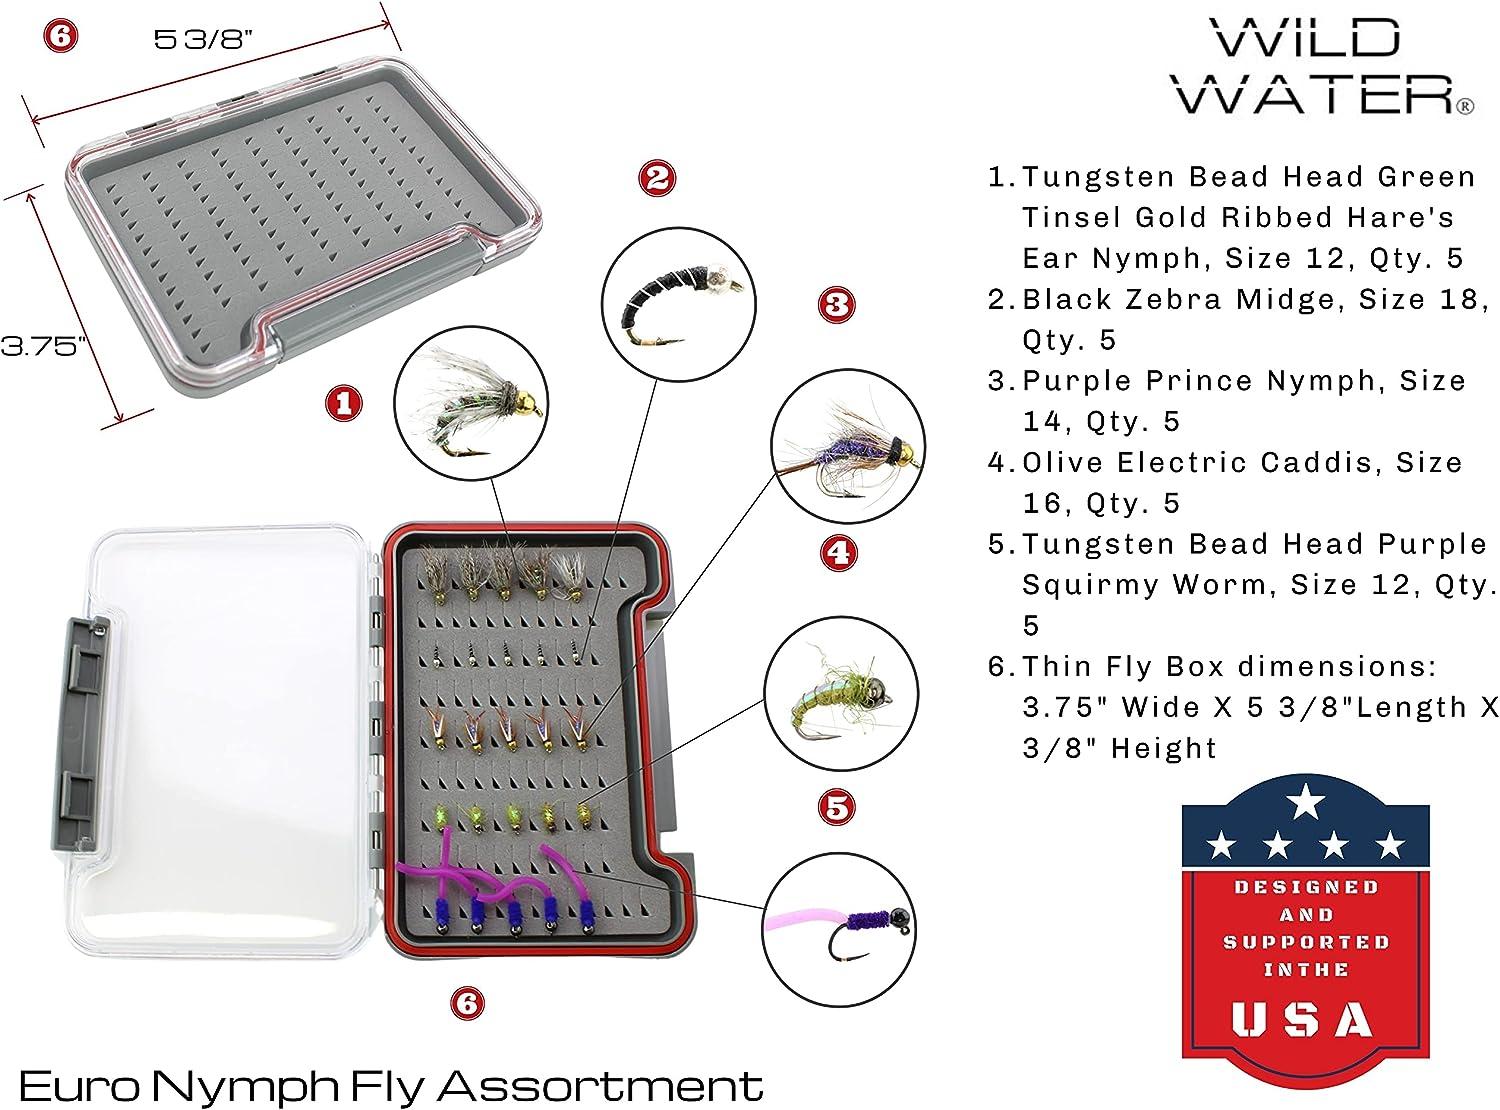 Wild Water Fly Fishing Complete Deluxe 3 Weight 10 Foot 4-Piece